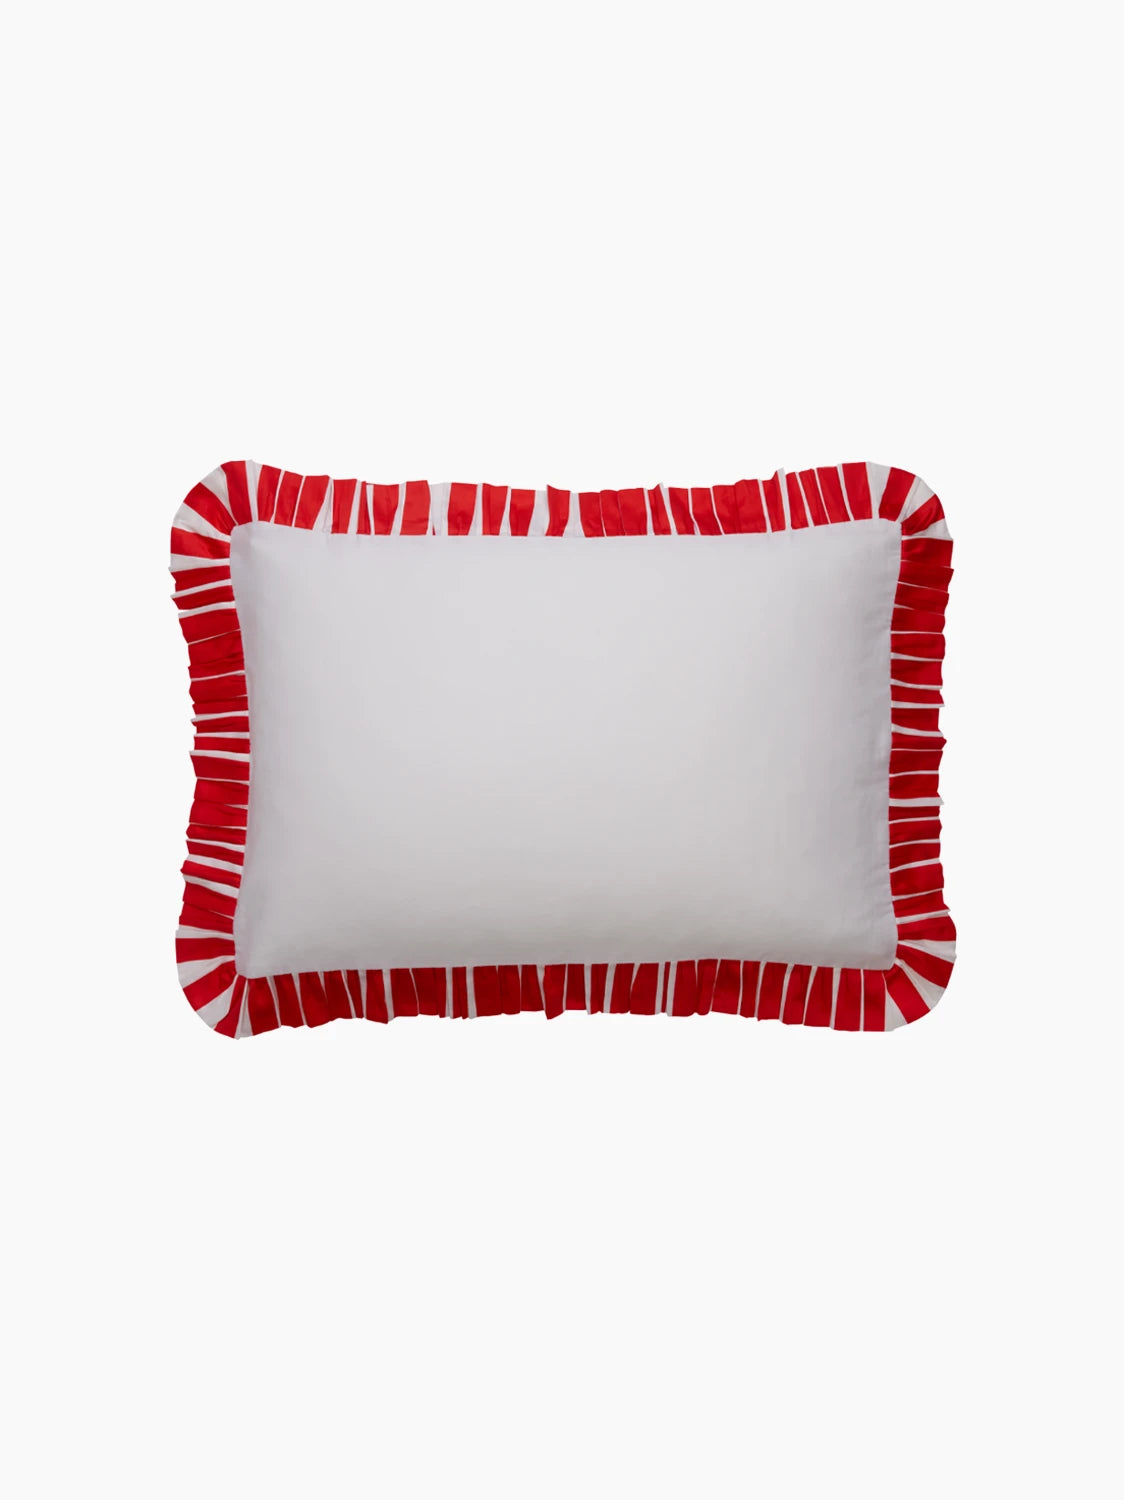 Personalised Candy Cane Bed Set